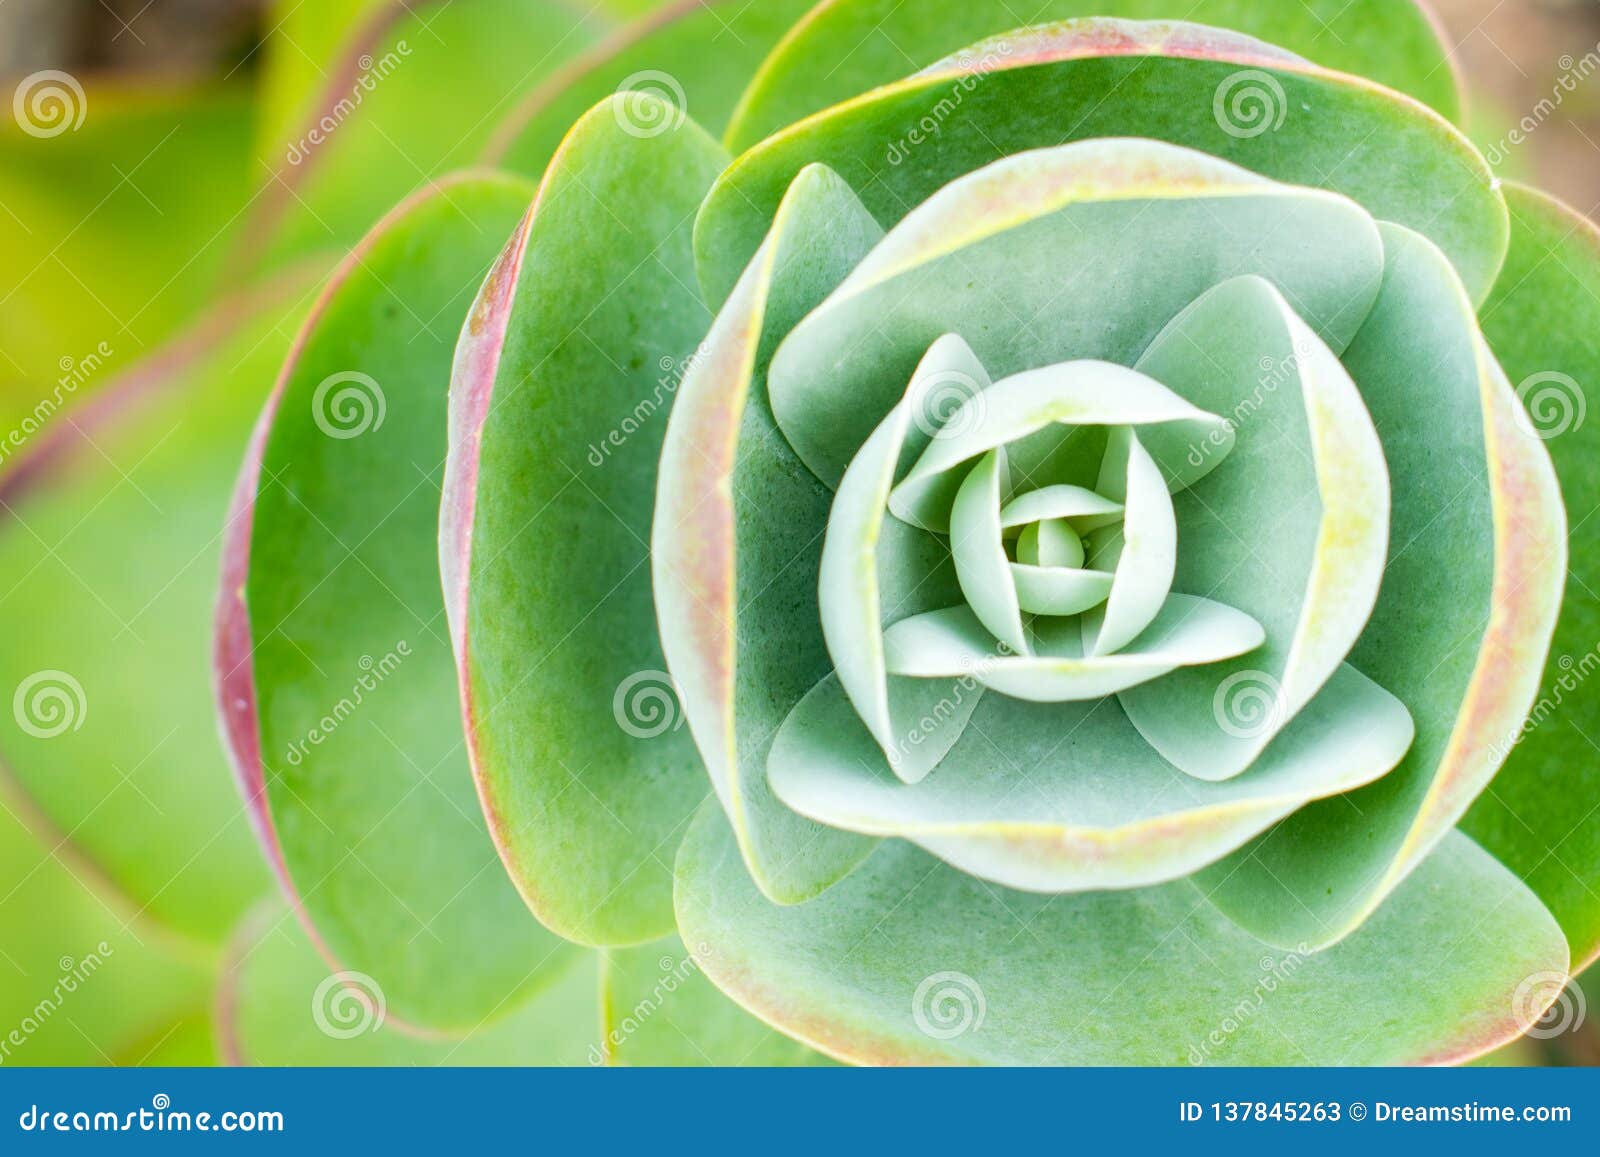 symmetrical plant seen from above